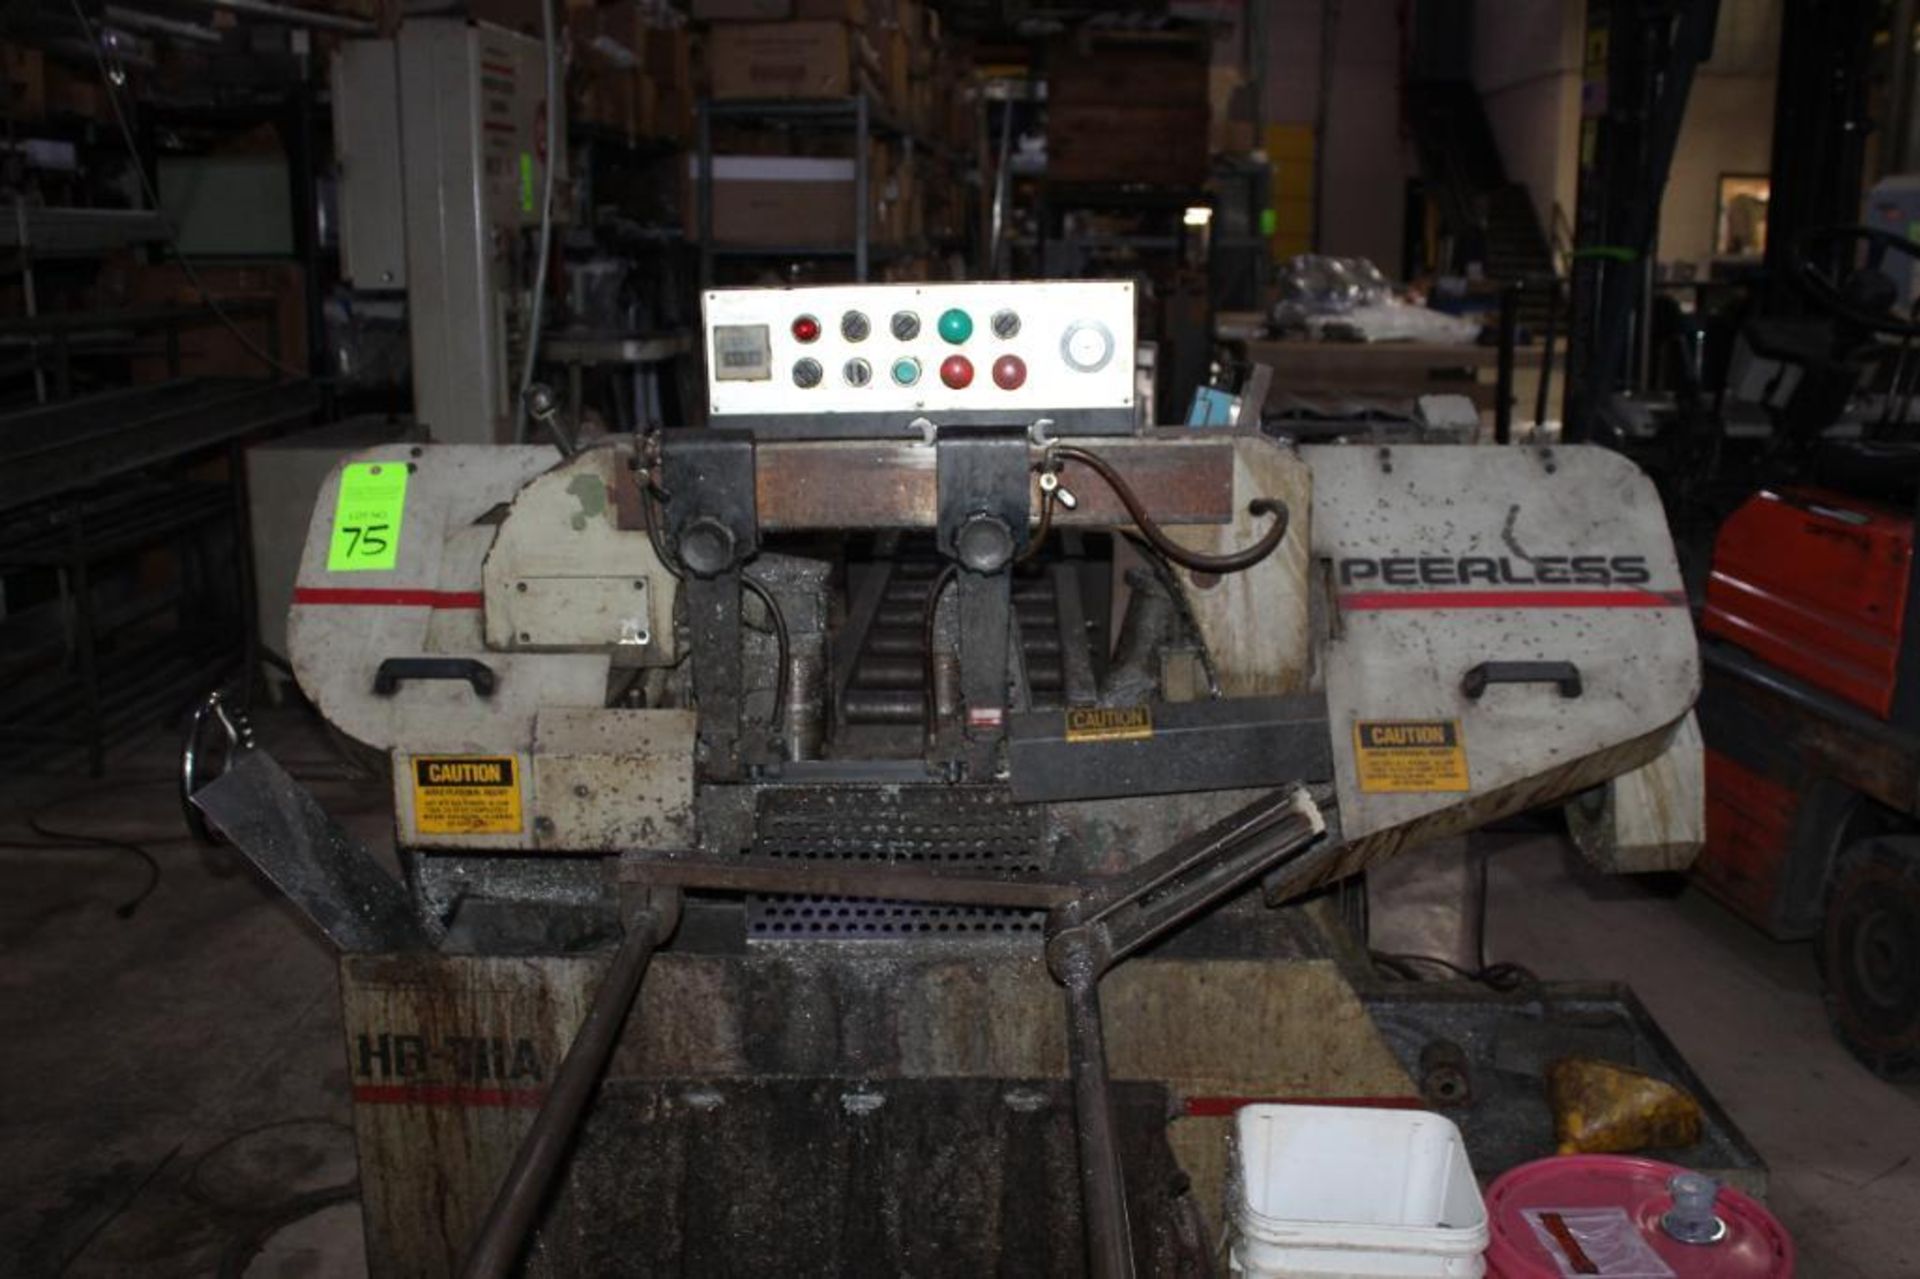 Peerless Horizontal Automatic Cutoff Saw Model HB711A with Autofeed Roller